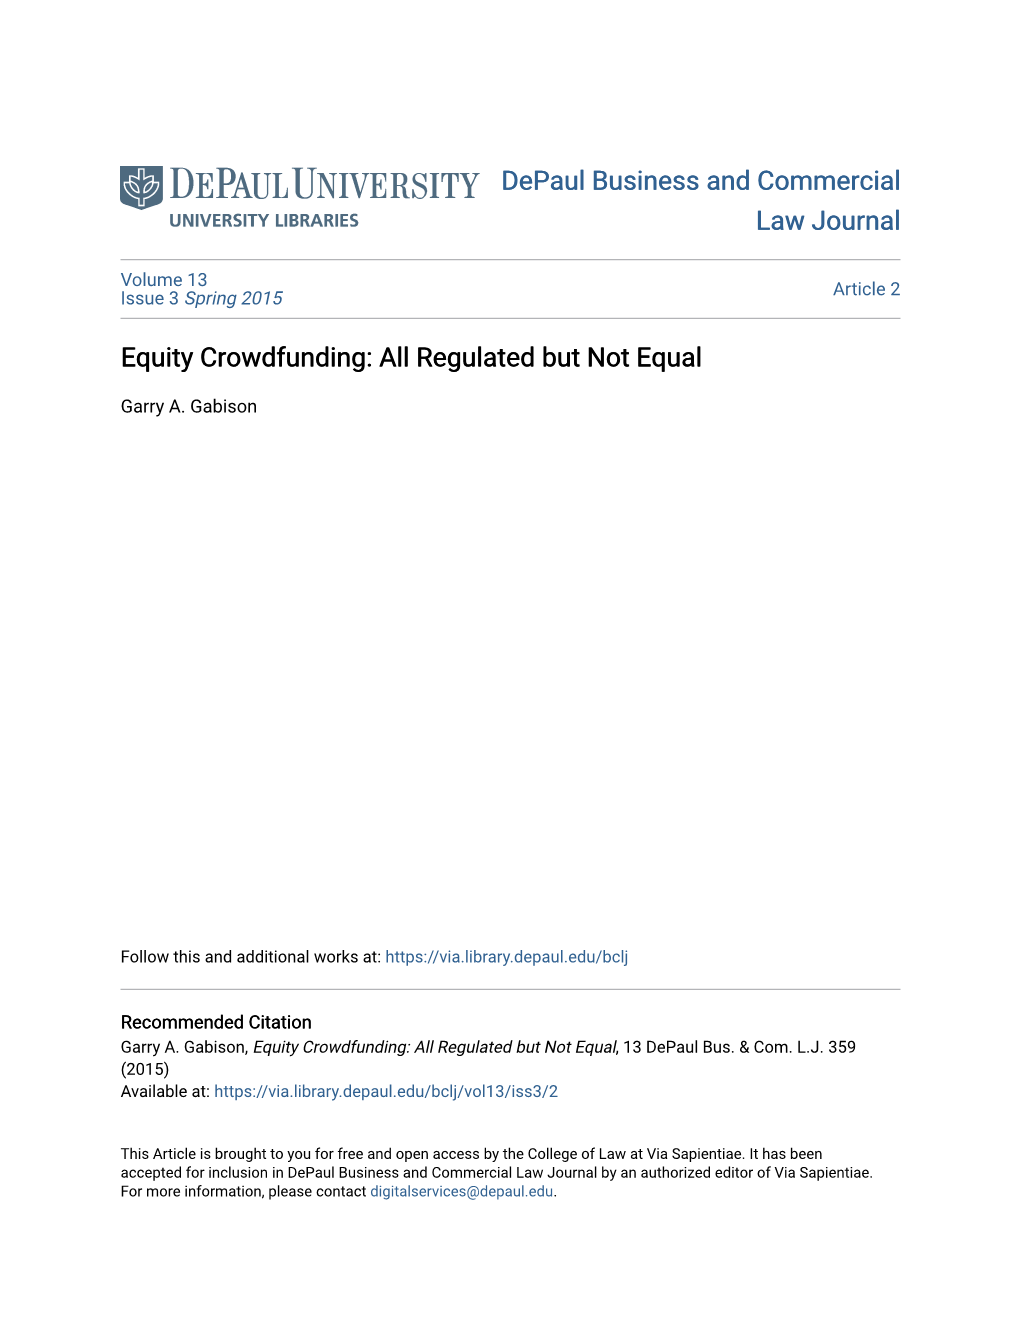 Equity Crowdfunding: All Regulated but Not Equal